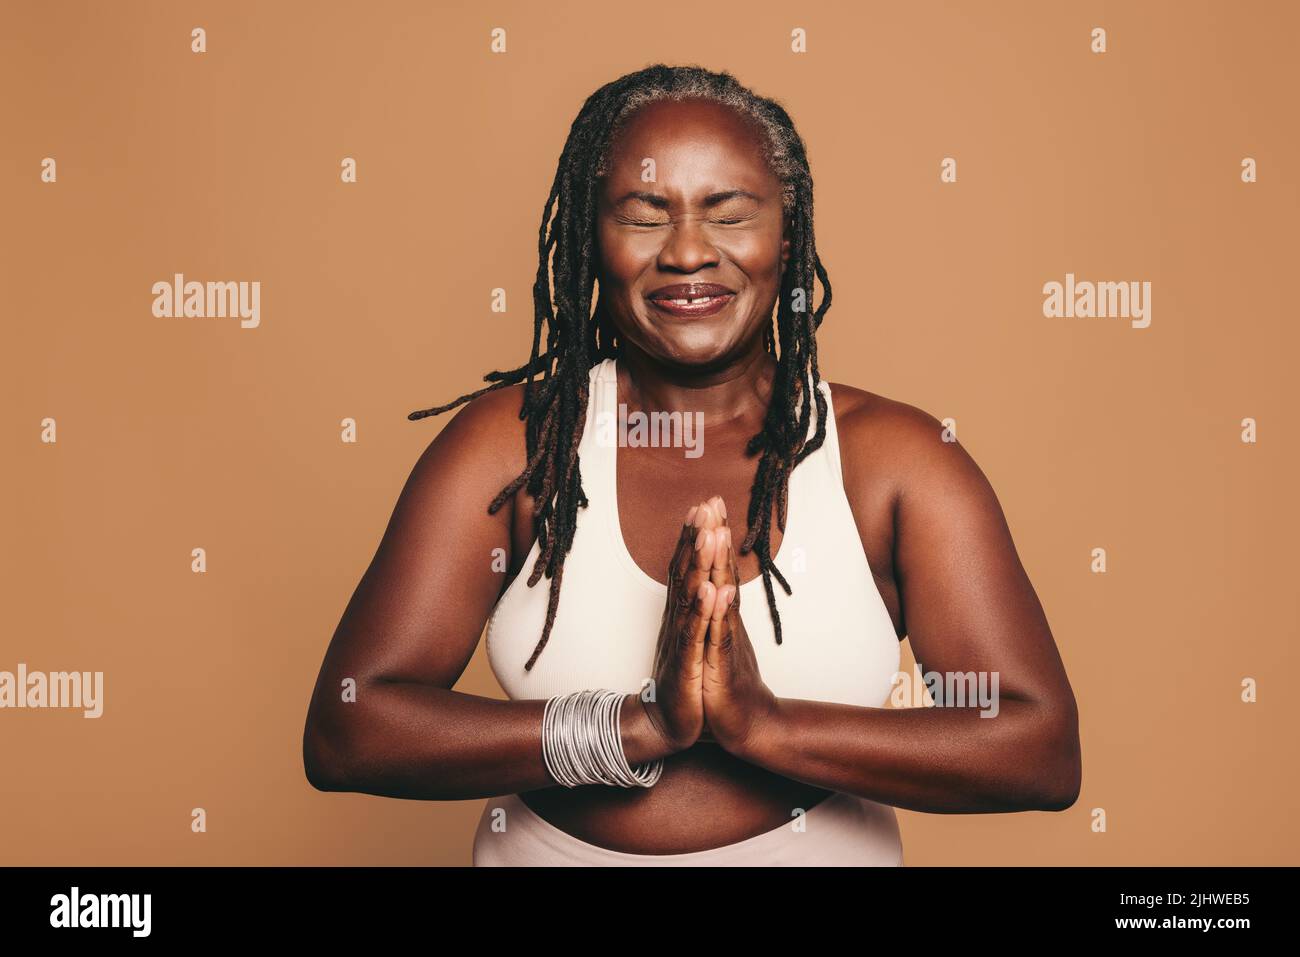 Cheerful woman meditating with her eyes closed and her hands in prayer position. Happy woman with dreadlocks practicing yoga in a studio. Sporty matur Stock Photo